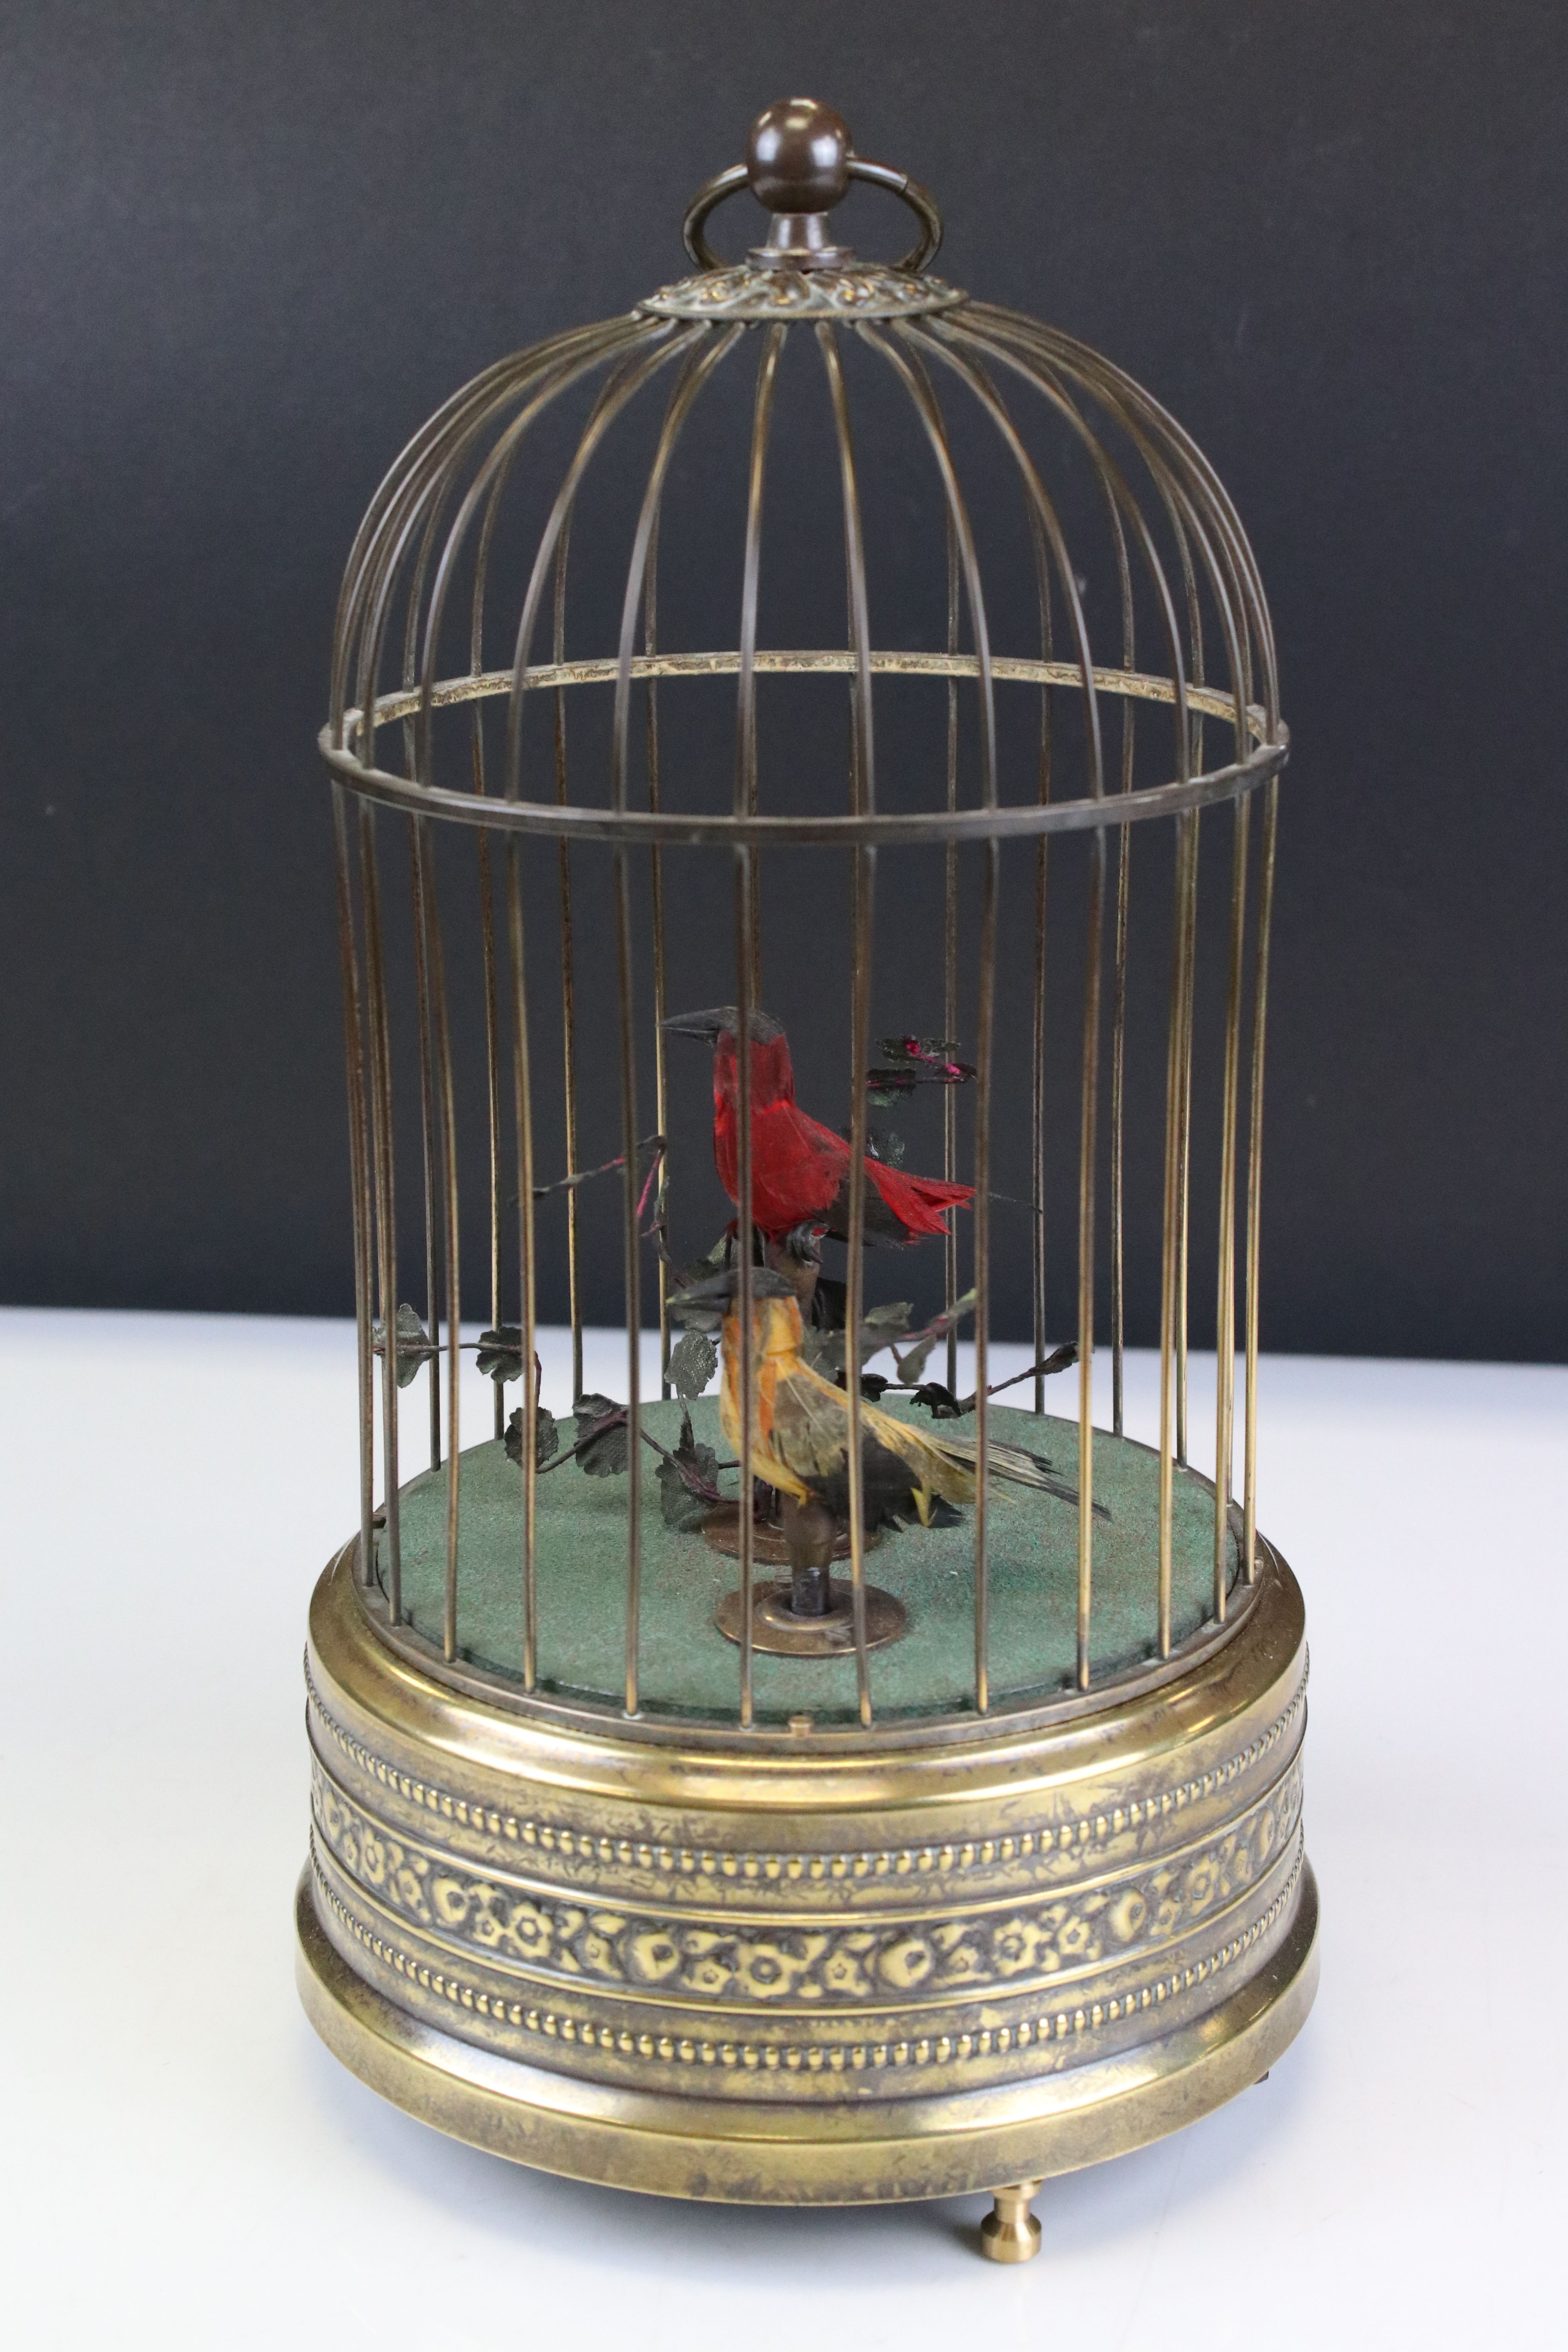 20th century Gilt Metal Bird Cage Clockwork Automaton with two singing birds, working at time of - Image 2 of 8